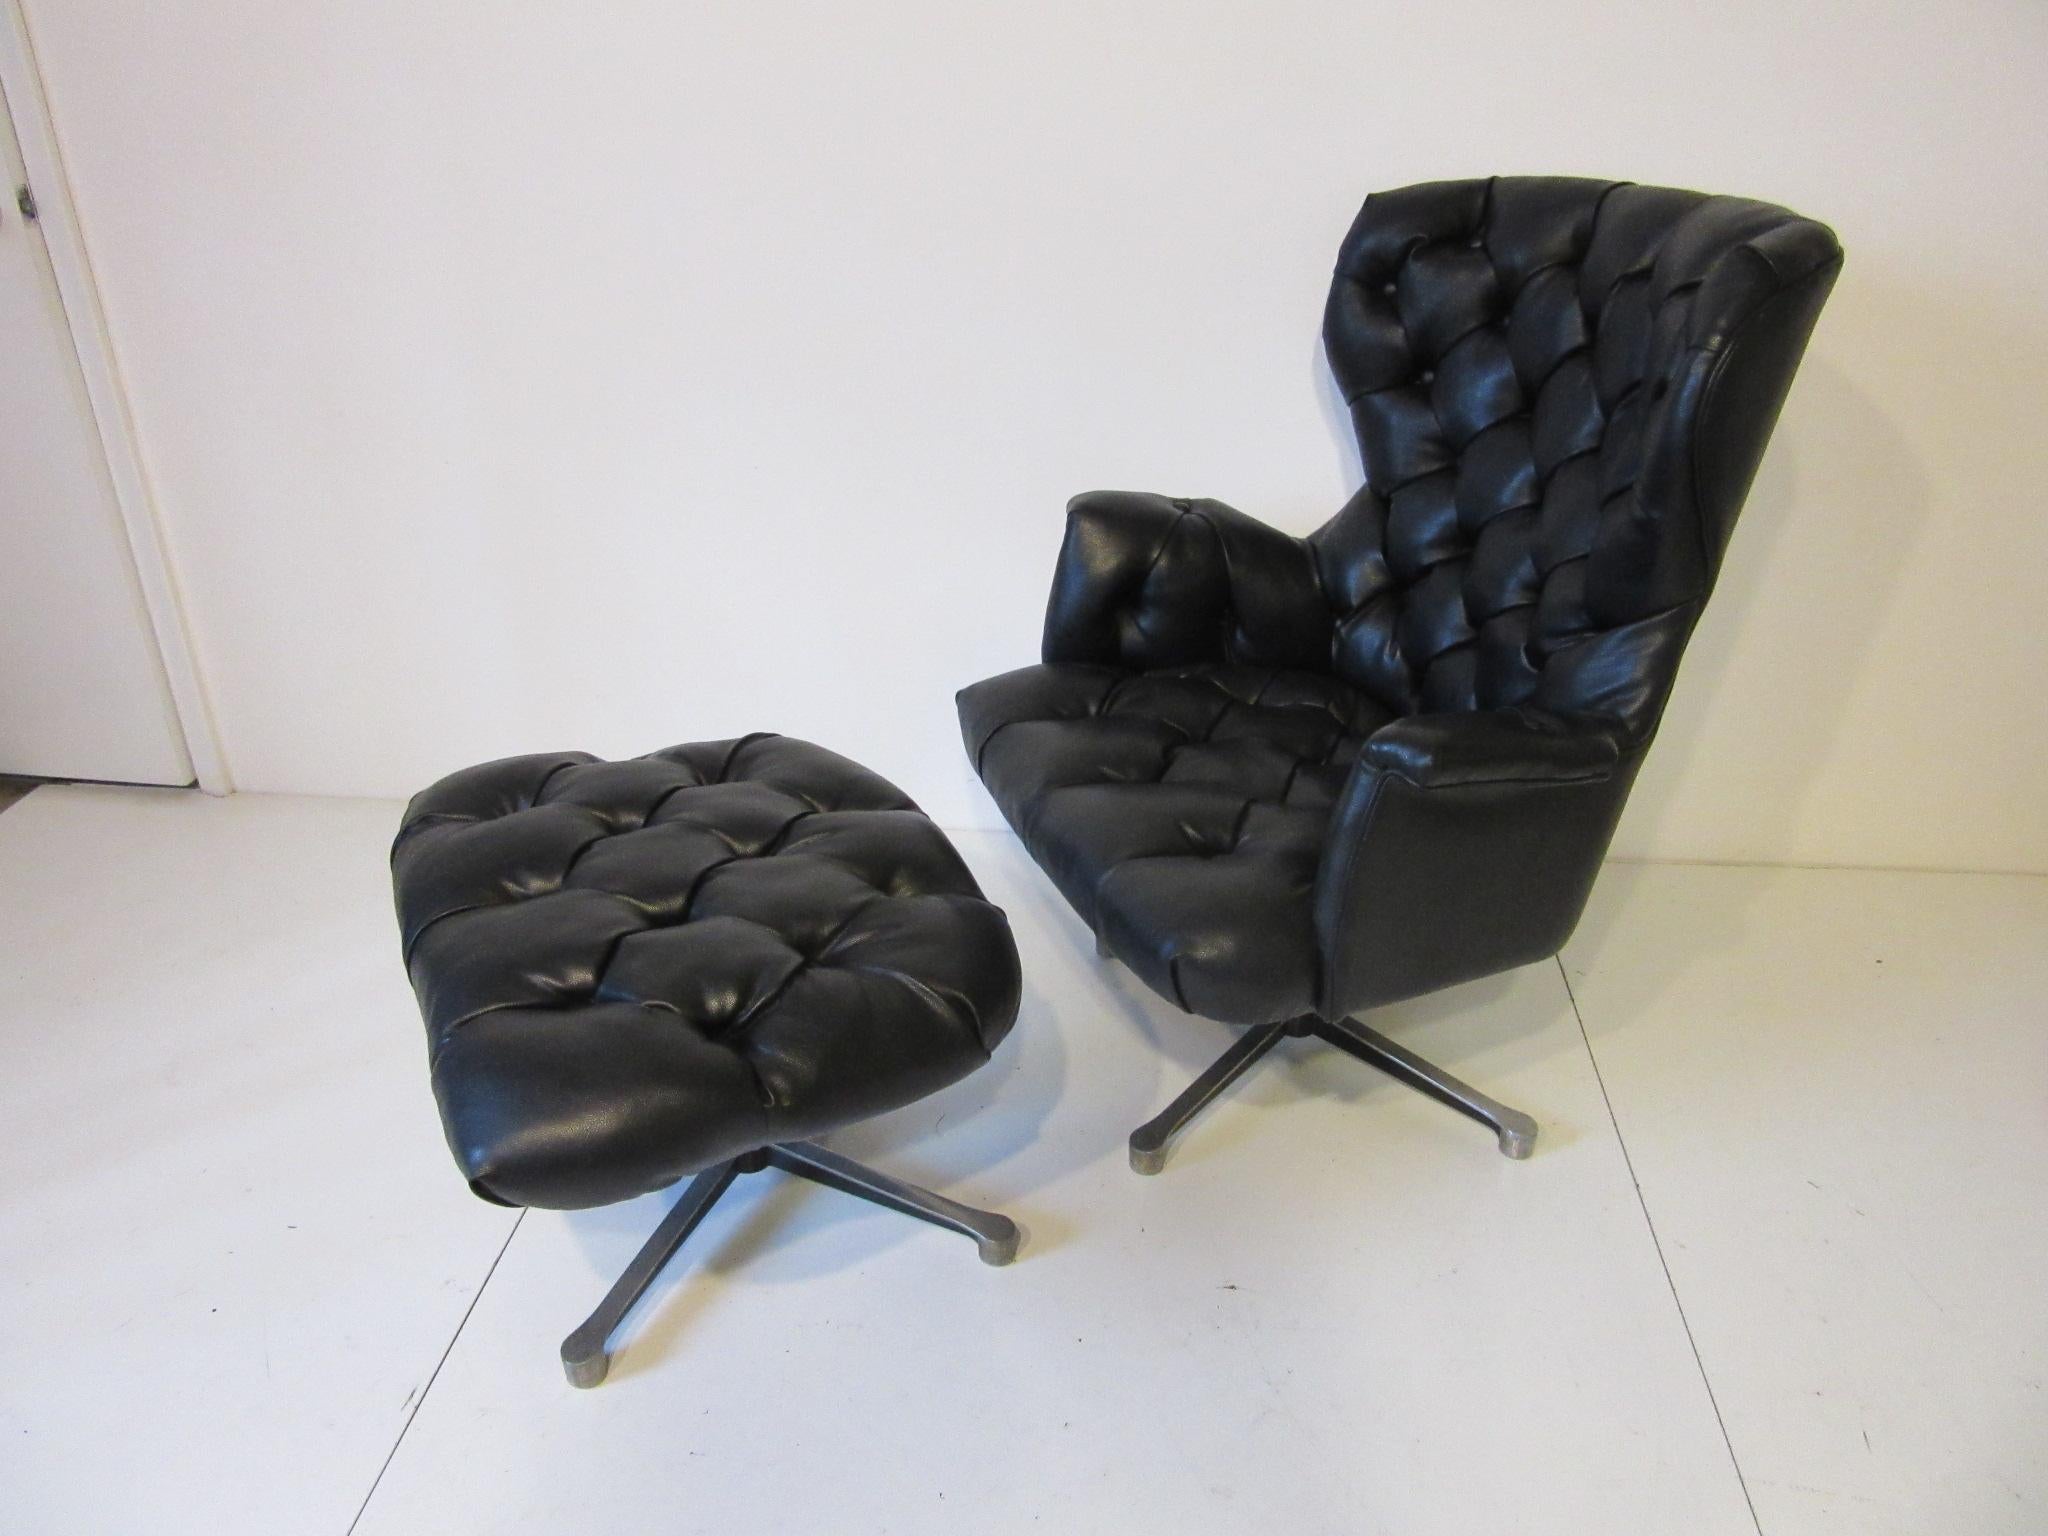 1960s-1970s Black Tufted Lounge Chair with Ottoman 3